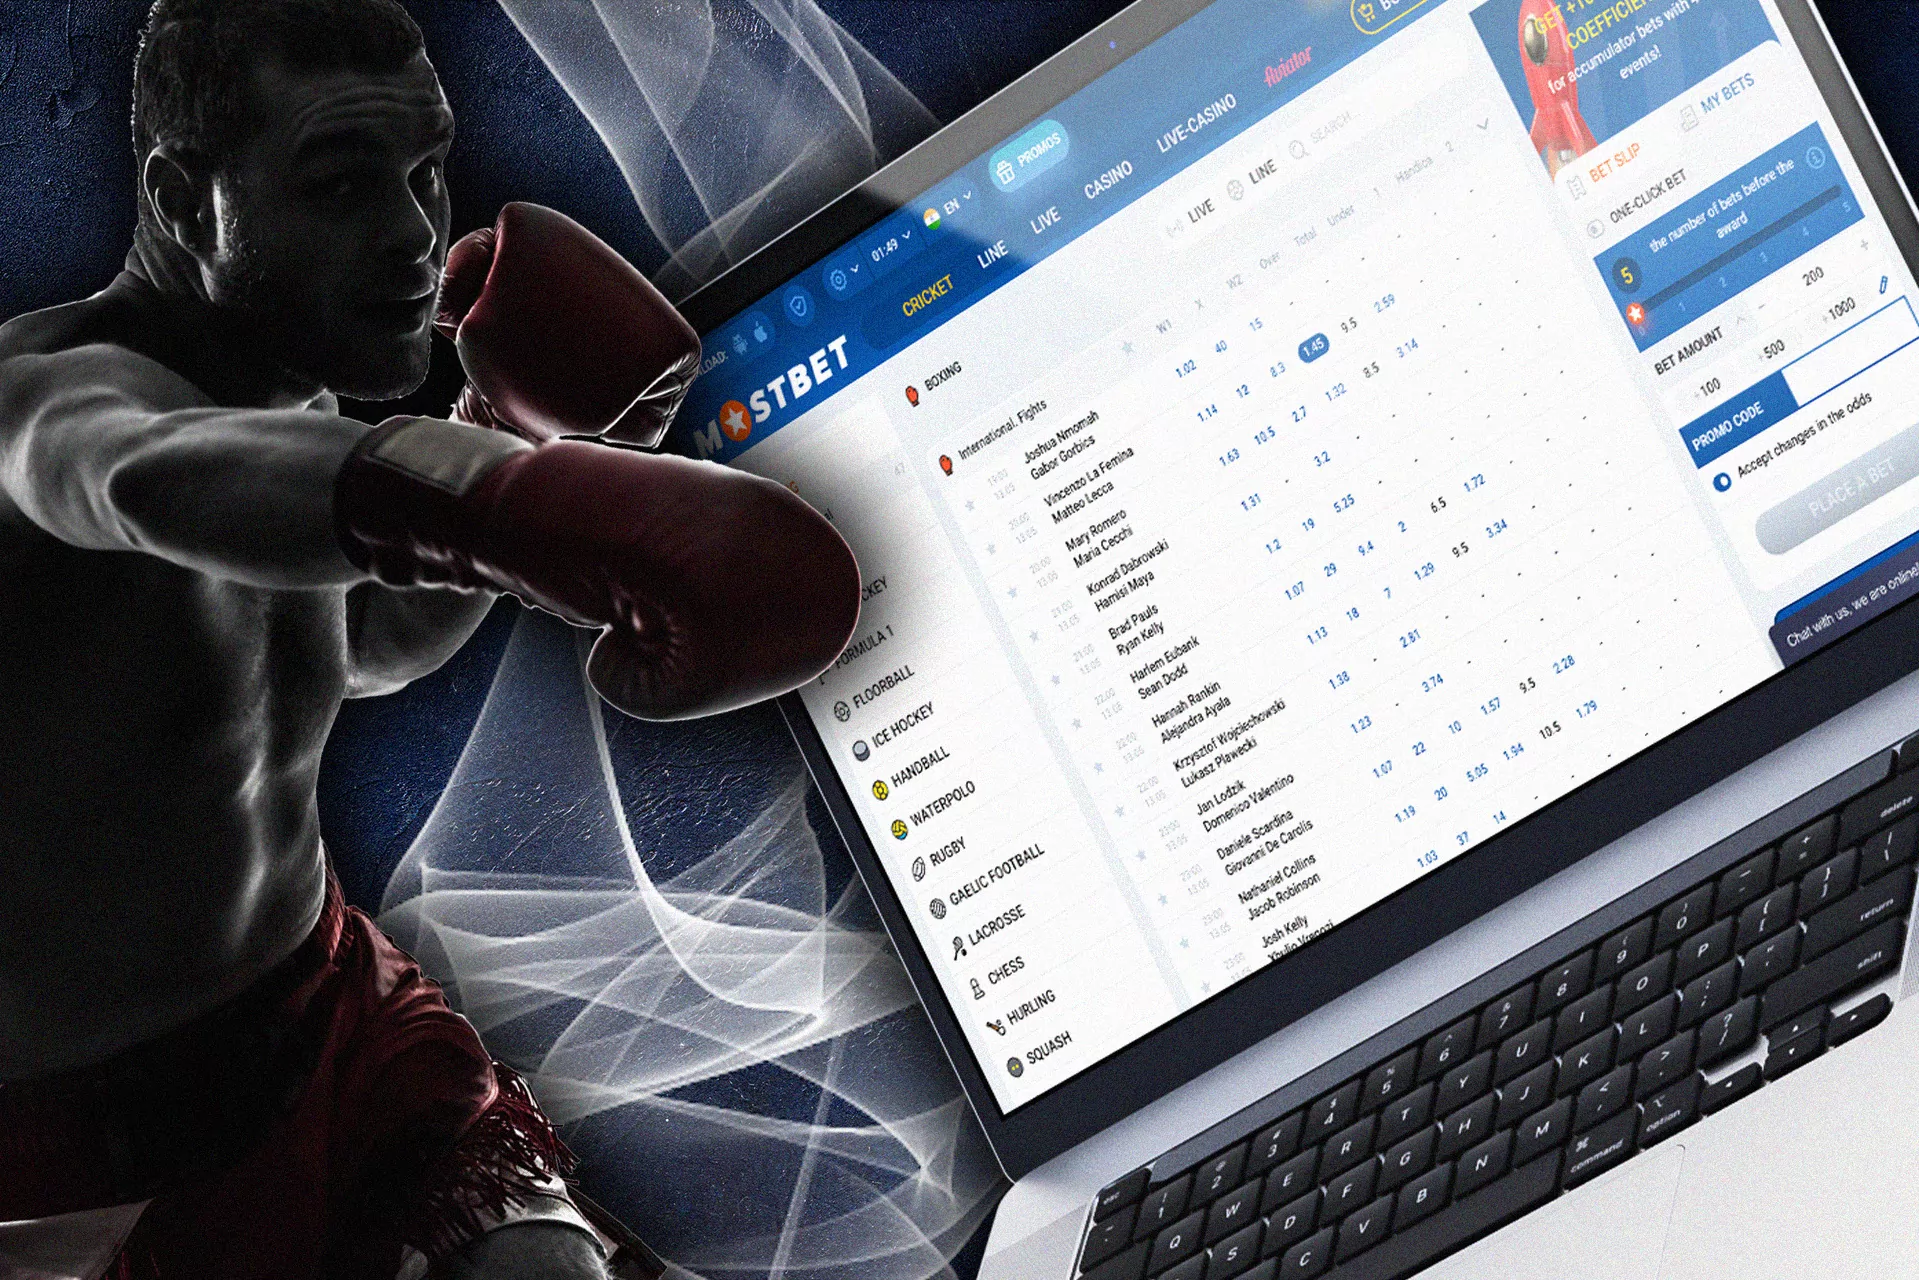 Pick a boxer and an event and place a bet at Mostbet.